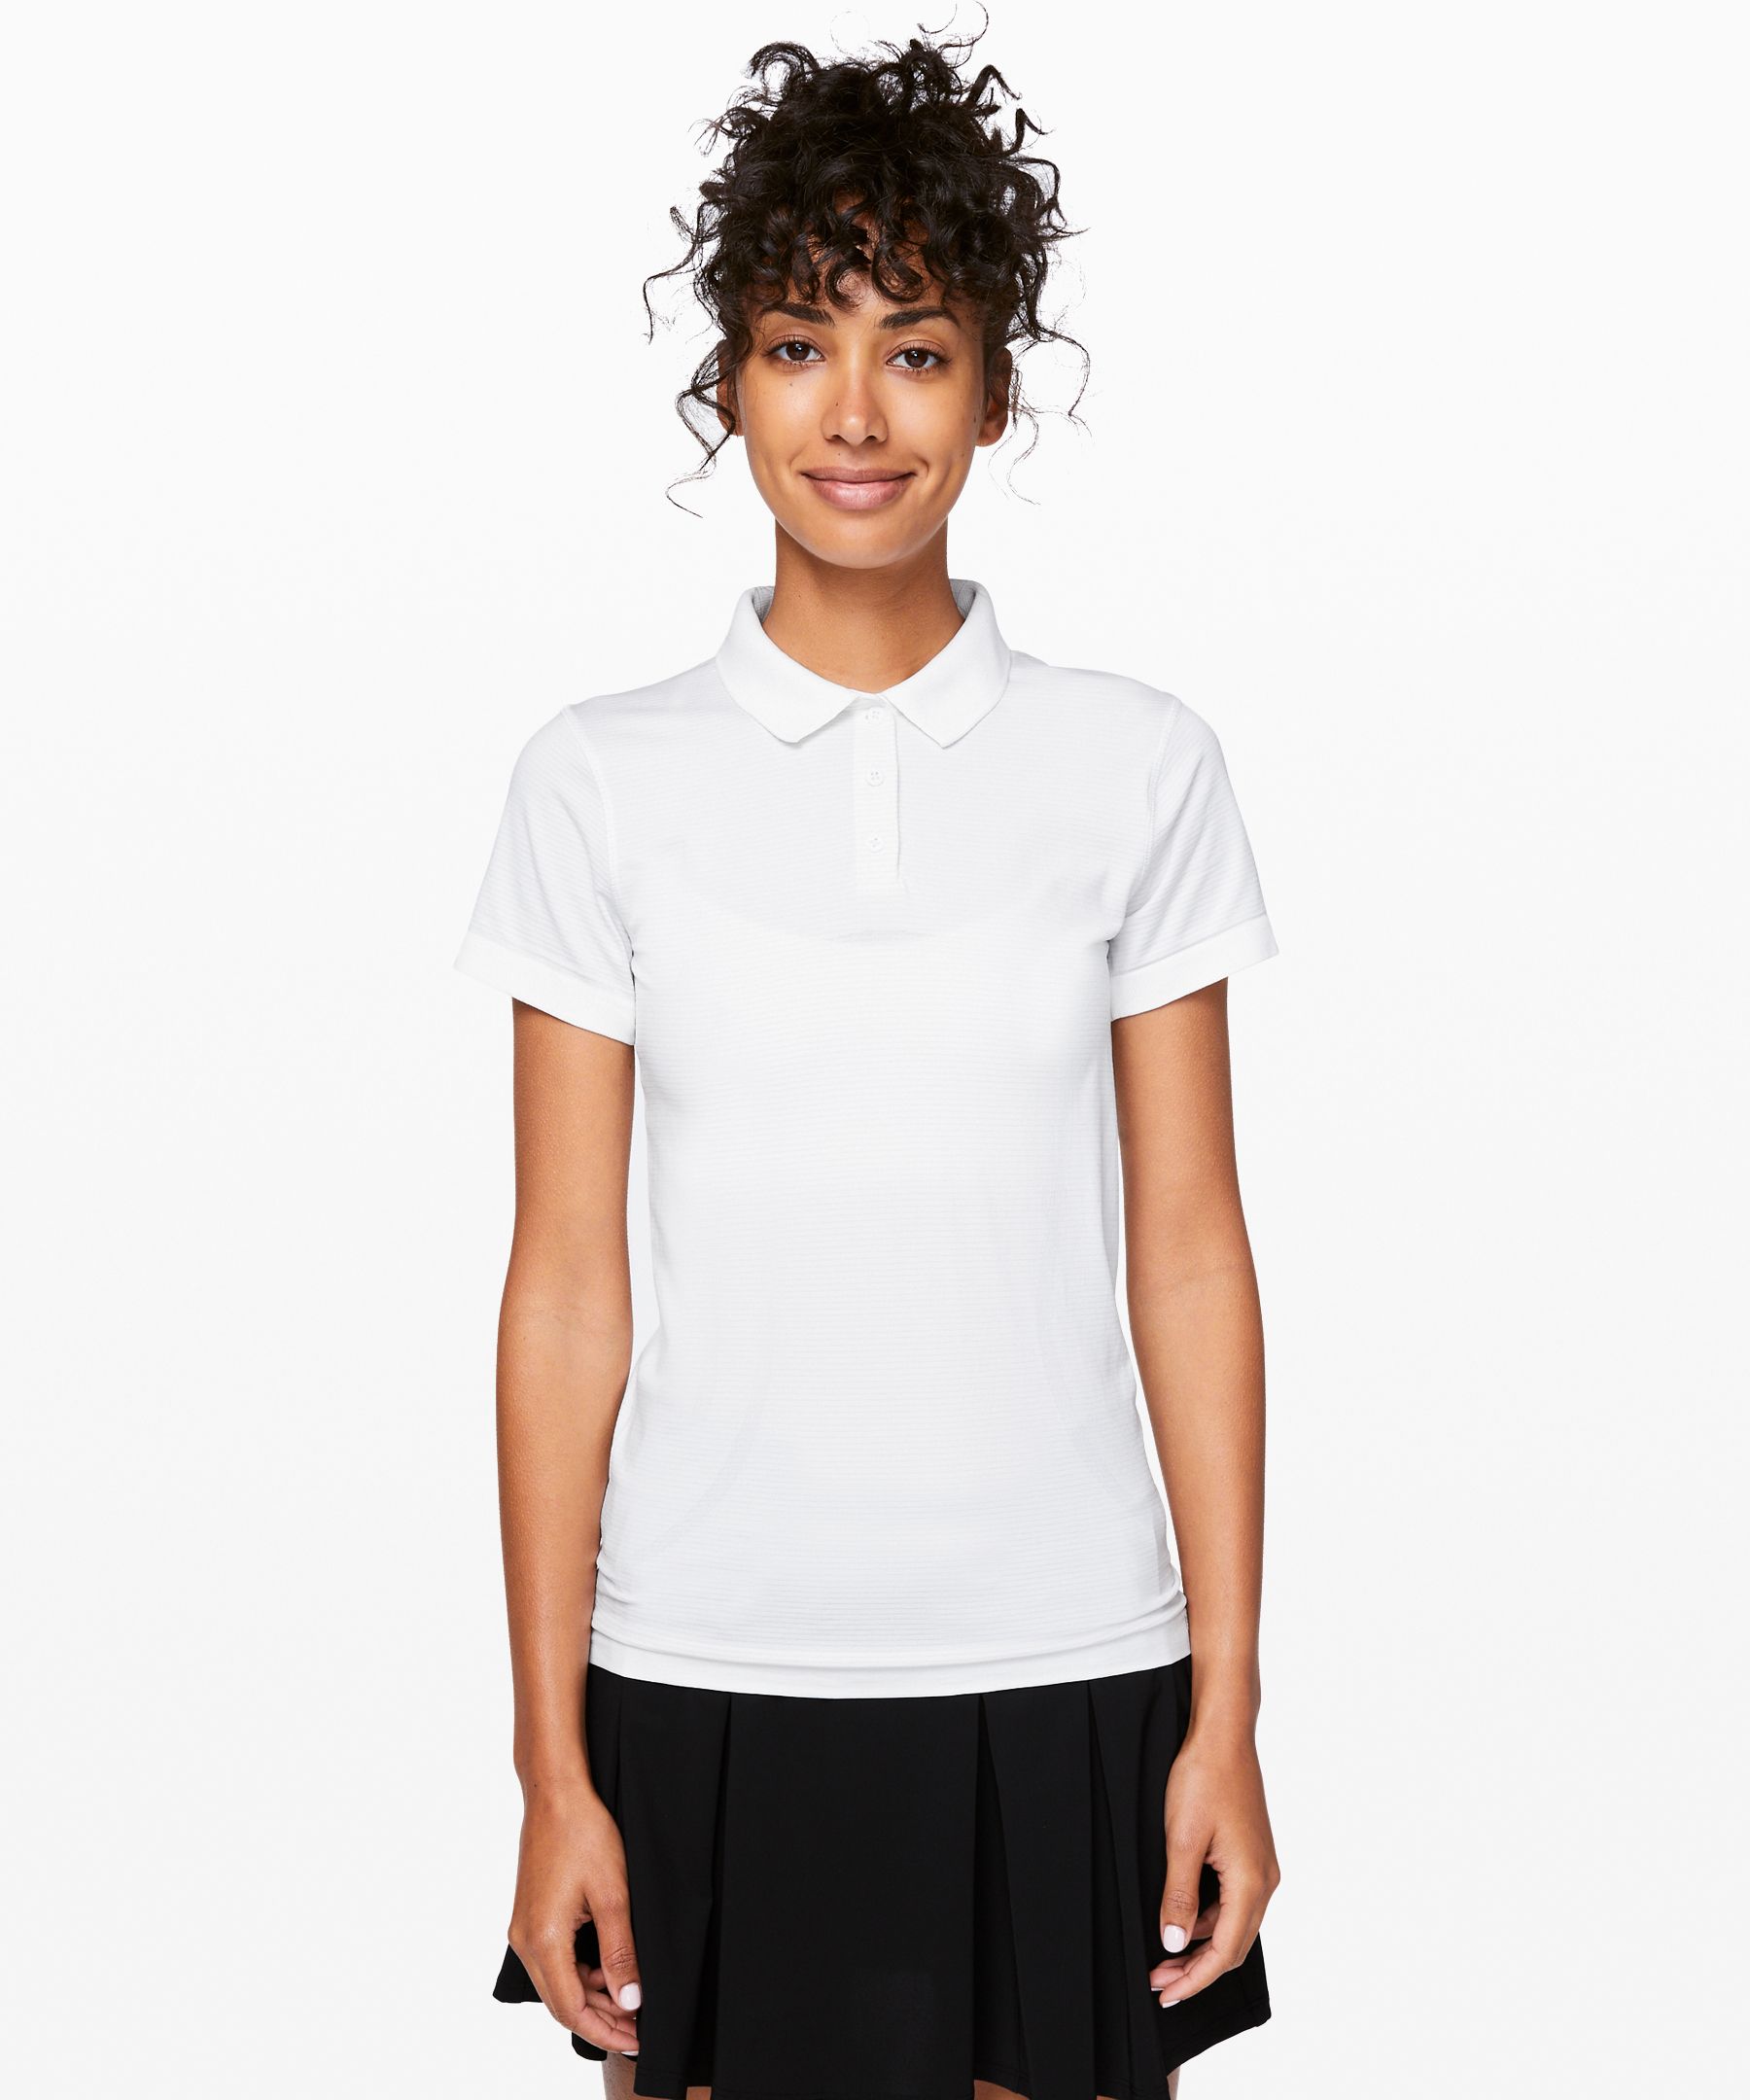 Lululemon Swiftly Speed Polo In White